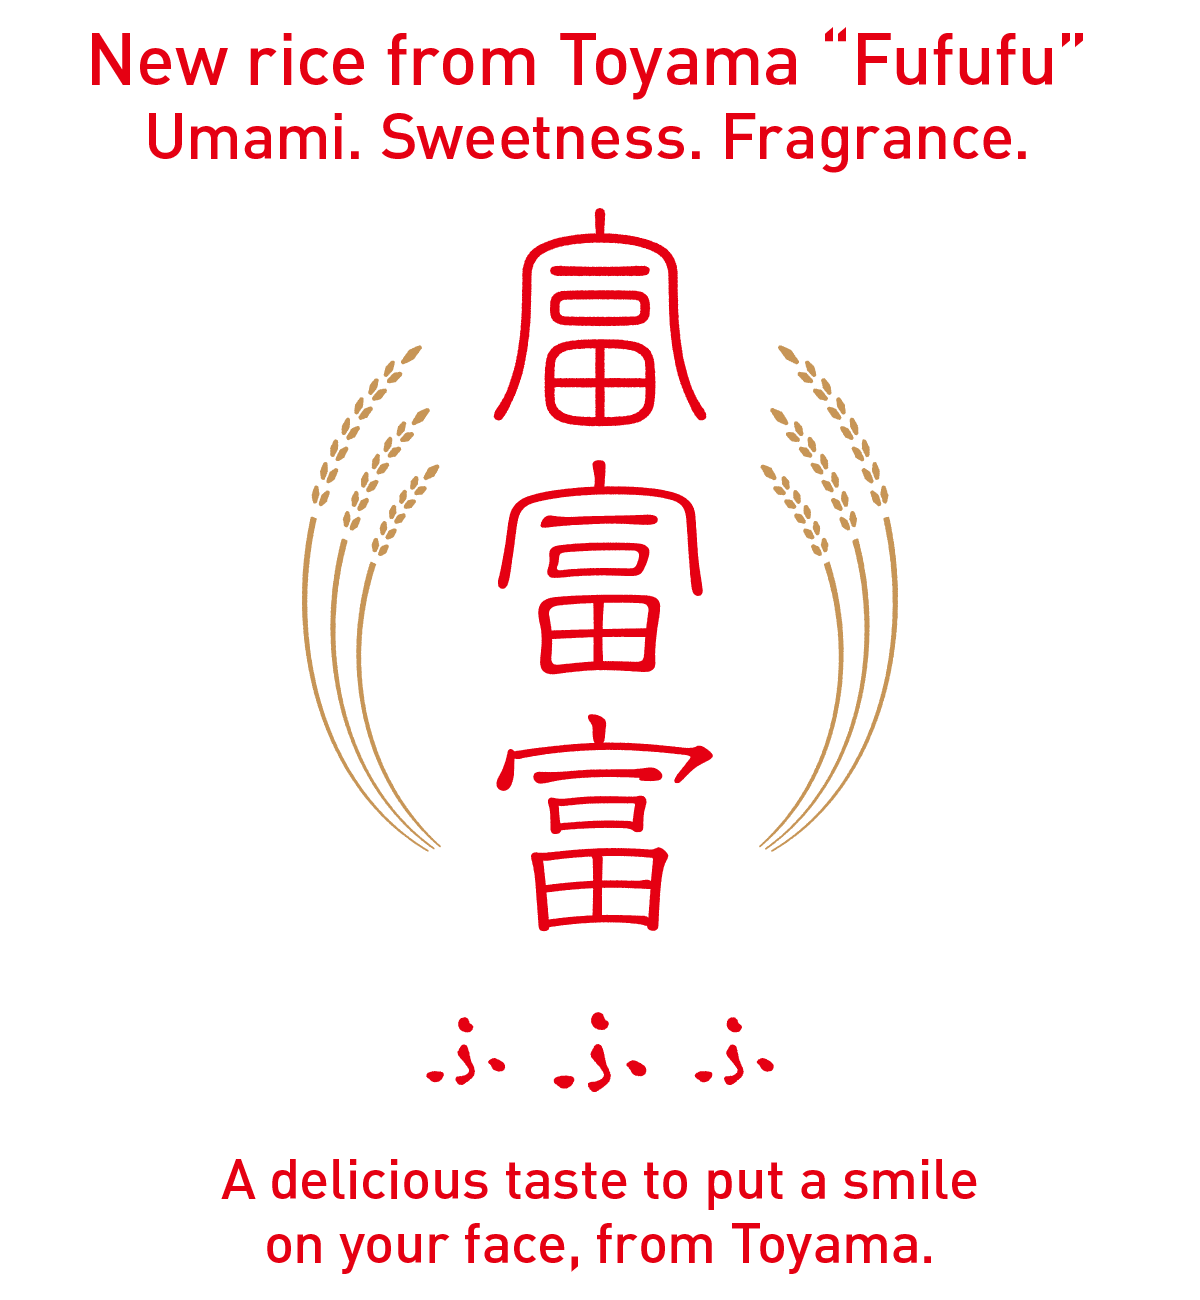 Japanese rice brand Fufufu / Umami. Sweetness. Fragrance. A delicious taste to put a smile on your face, from Toyama.